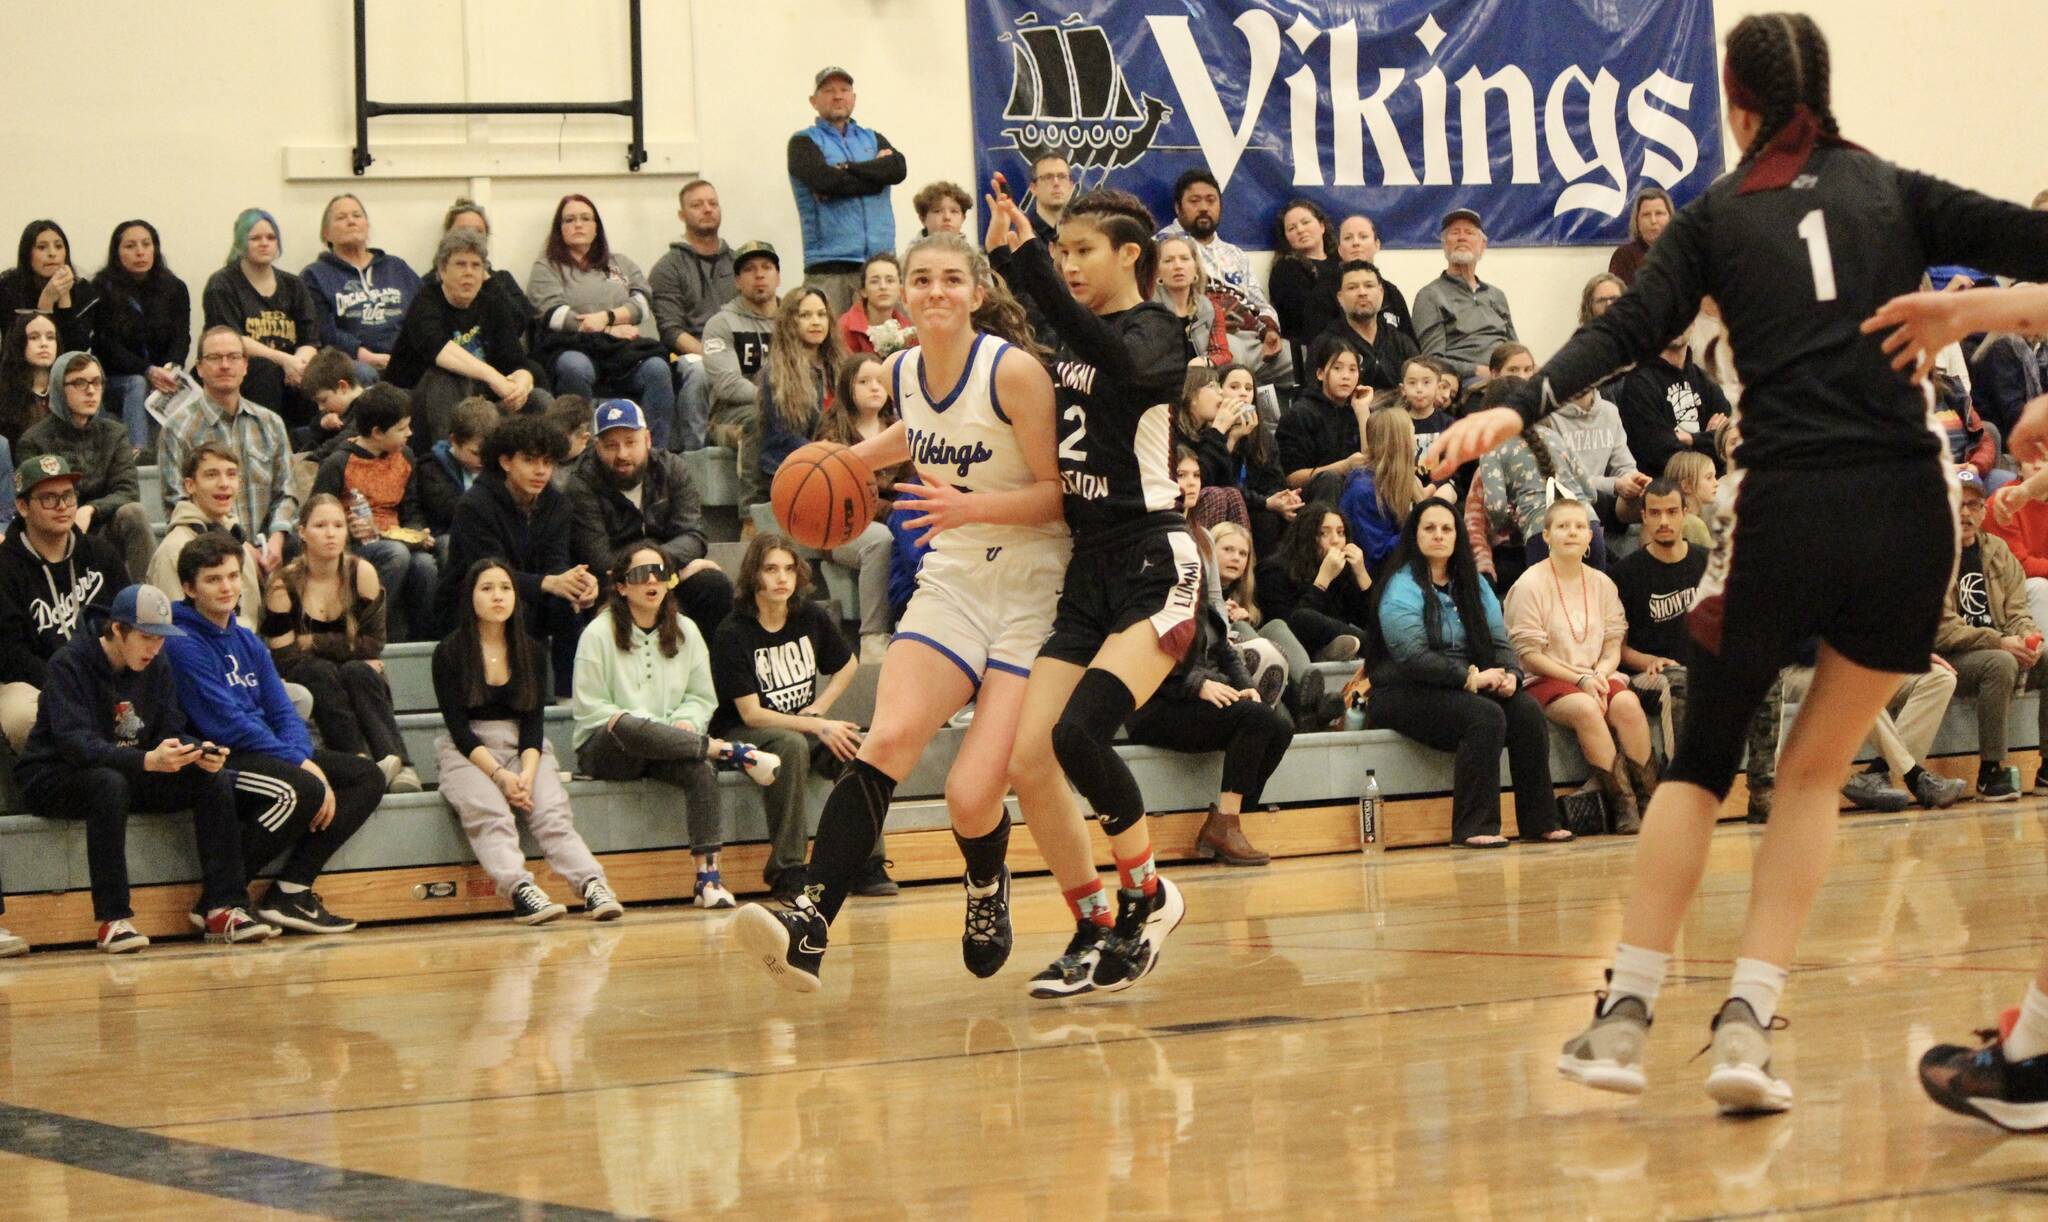 Corey Wiscomb photo.
Bethany Carter drives the baseline against up close pressure from the Lummi defense.